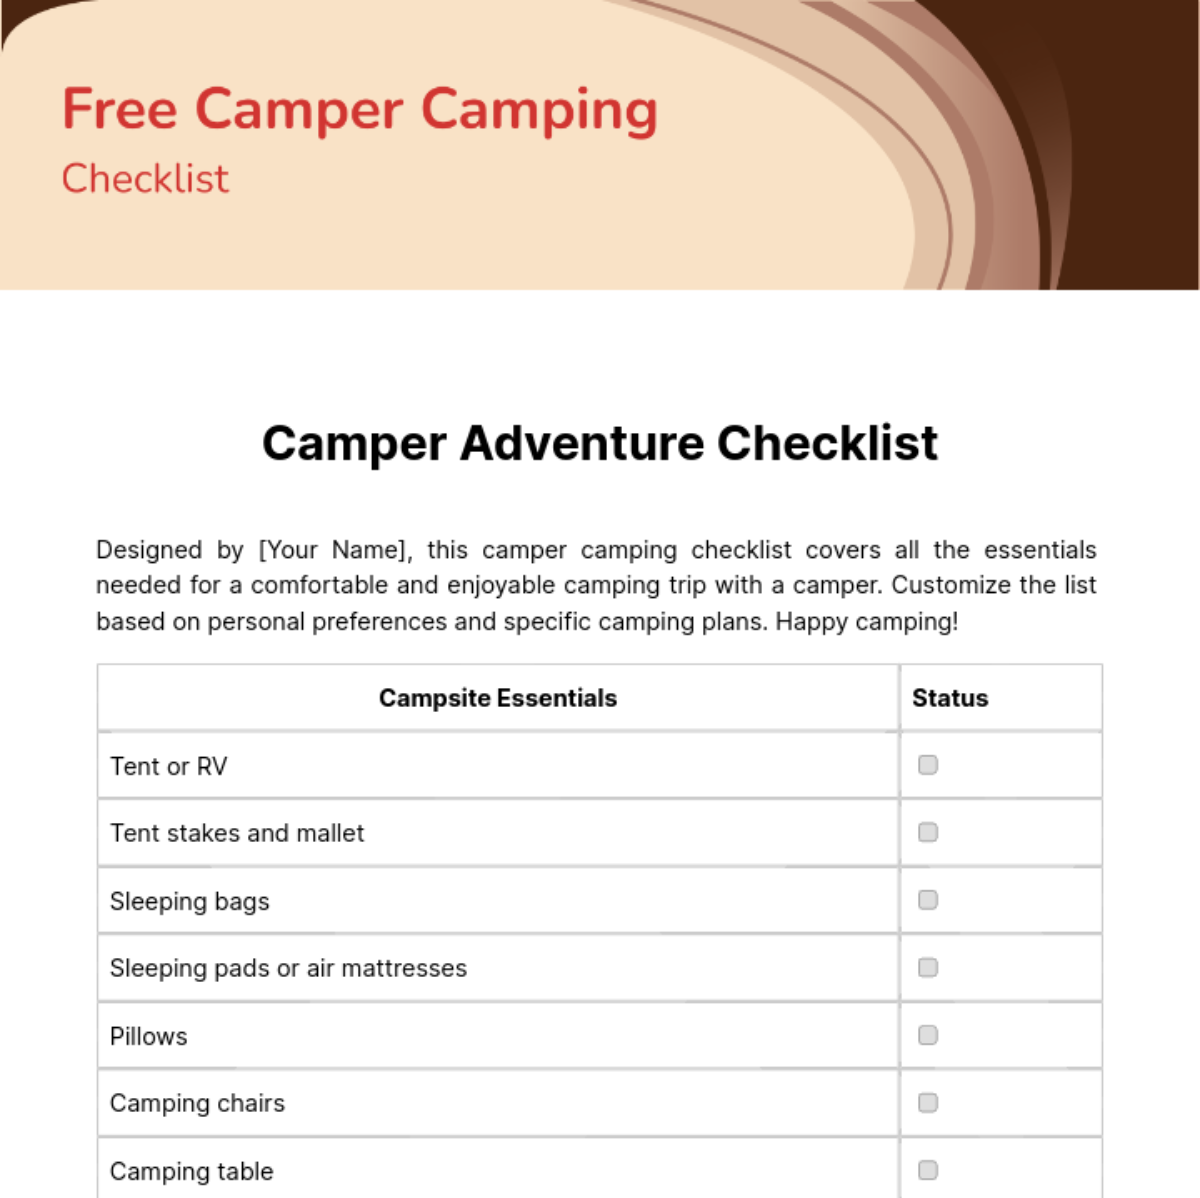 Free Camper Camping Checklist Template